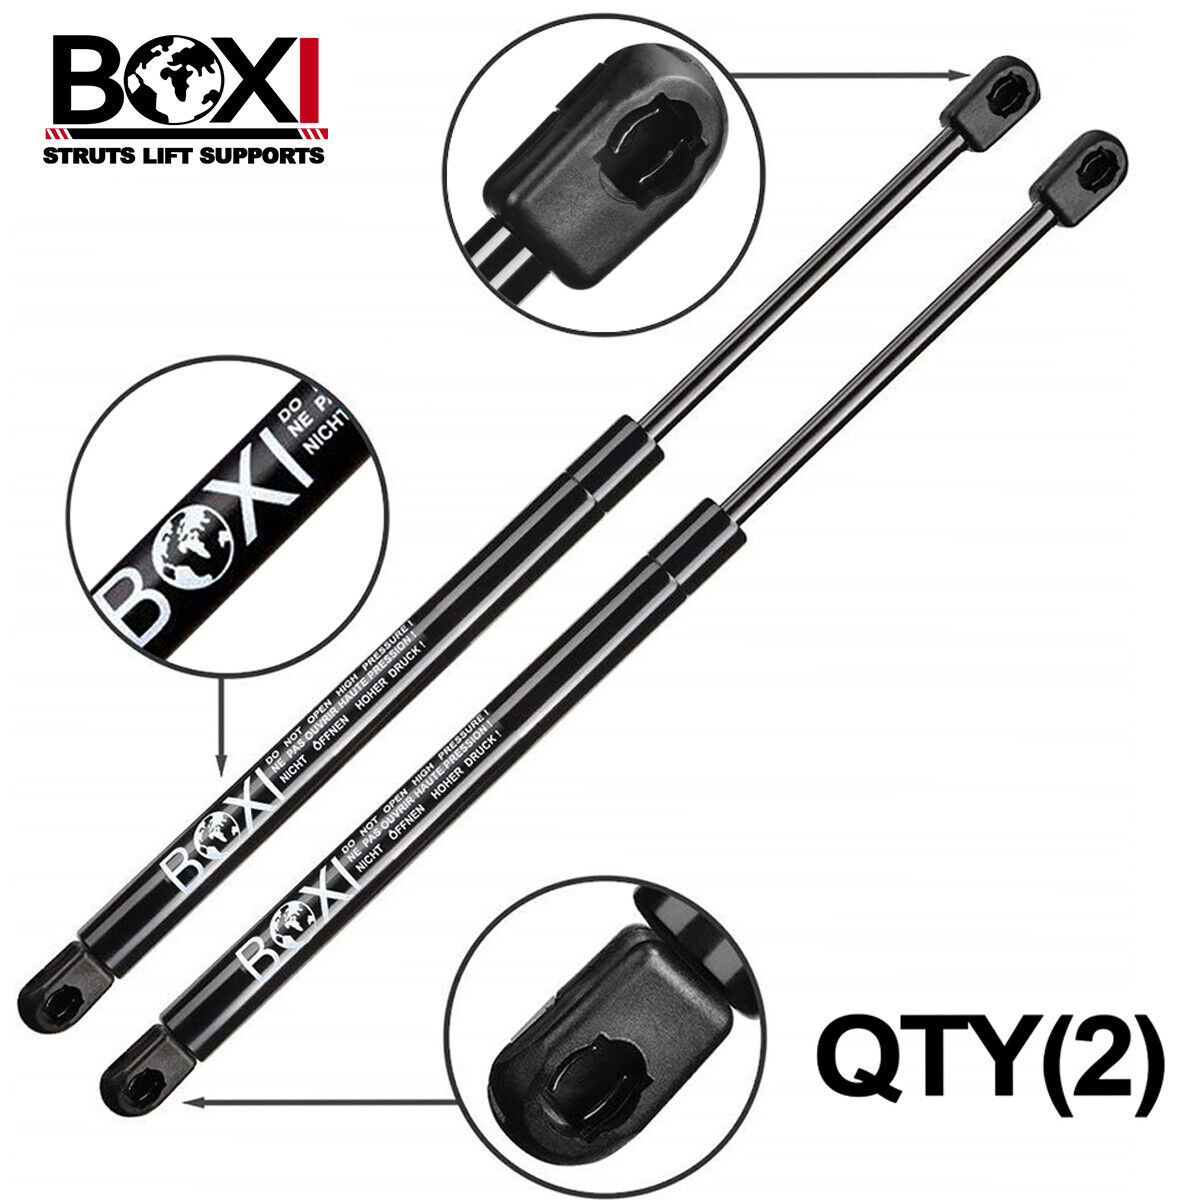 2QTY REAR GLASS WINDOW SHOCK SPRING LIFT SUPPORT FOR FORD EXCURSION 2000-2005